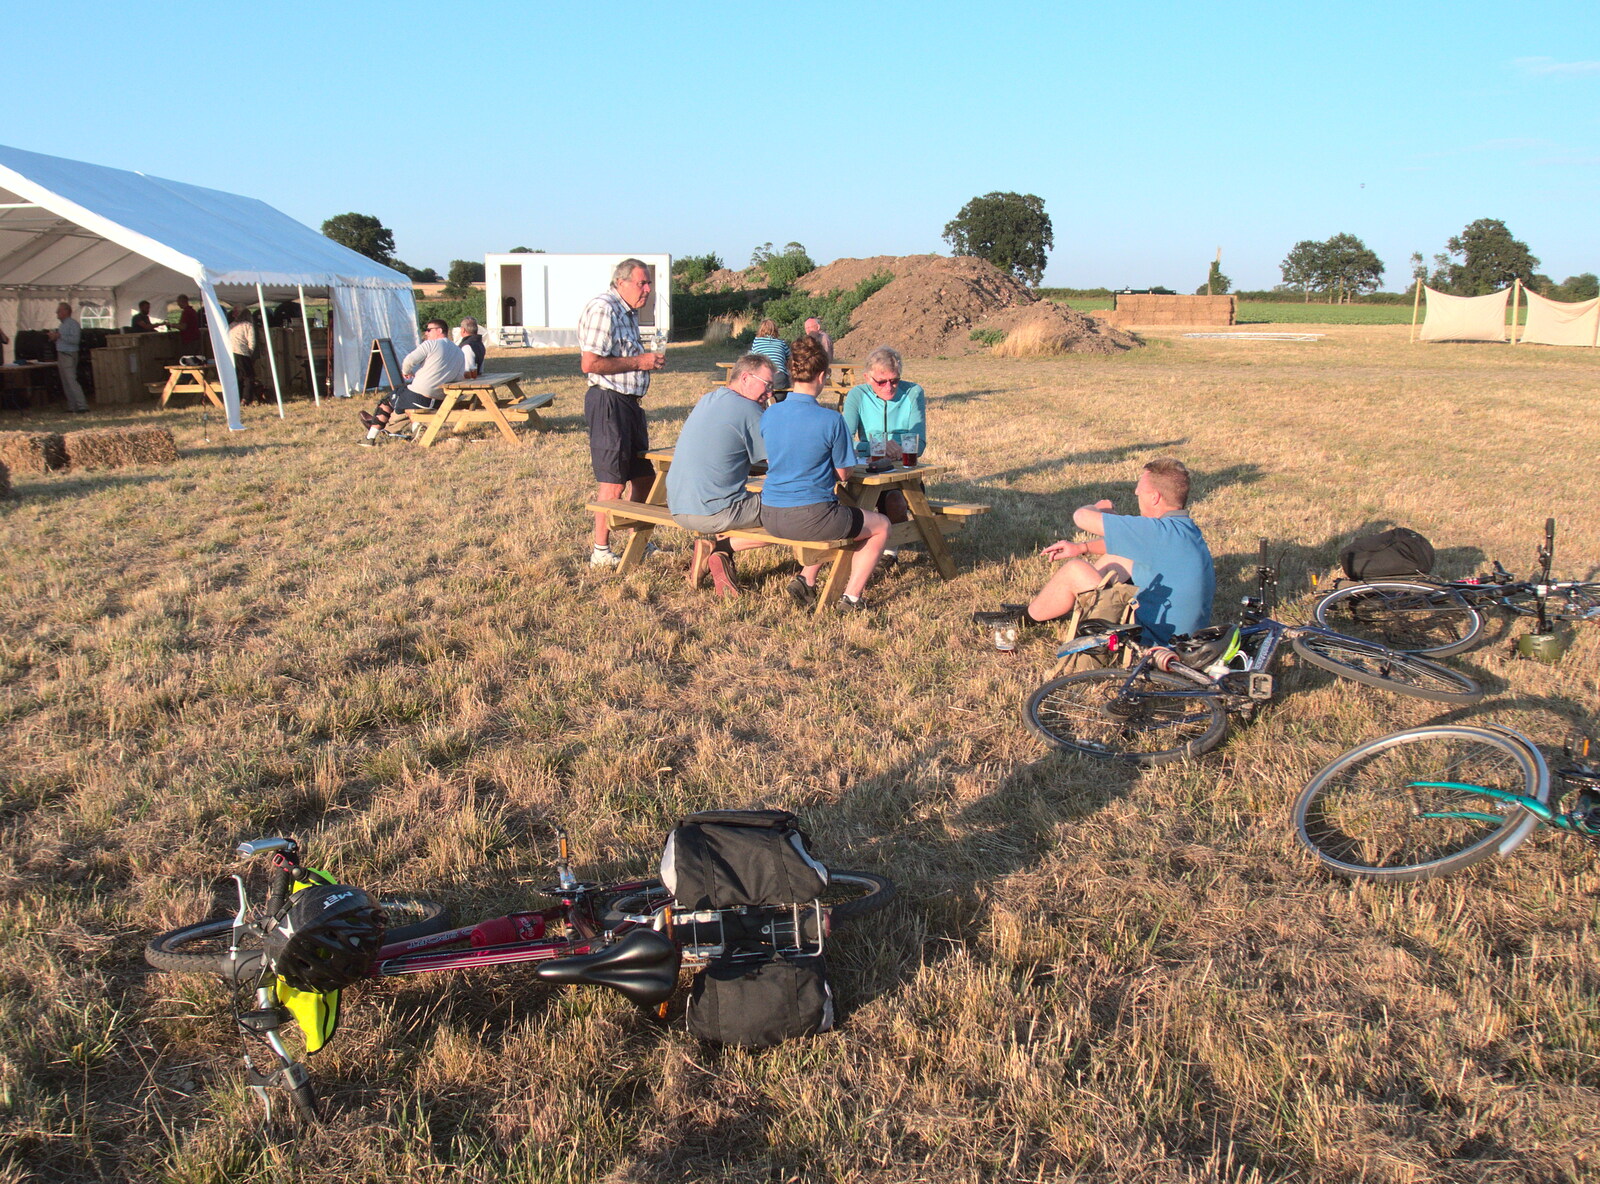 The BSCC on the grass at Star Wing from The BSCC Rides to Star Wing Beer Festival, Redgrave, Suffolk - 12th July 2018